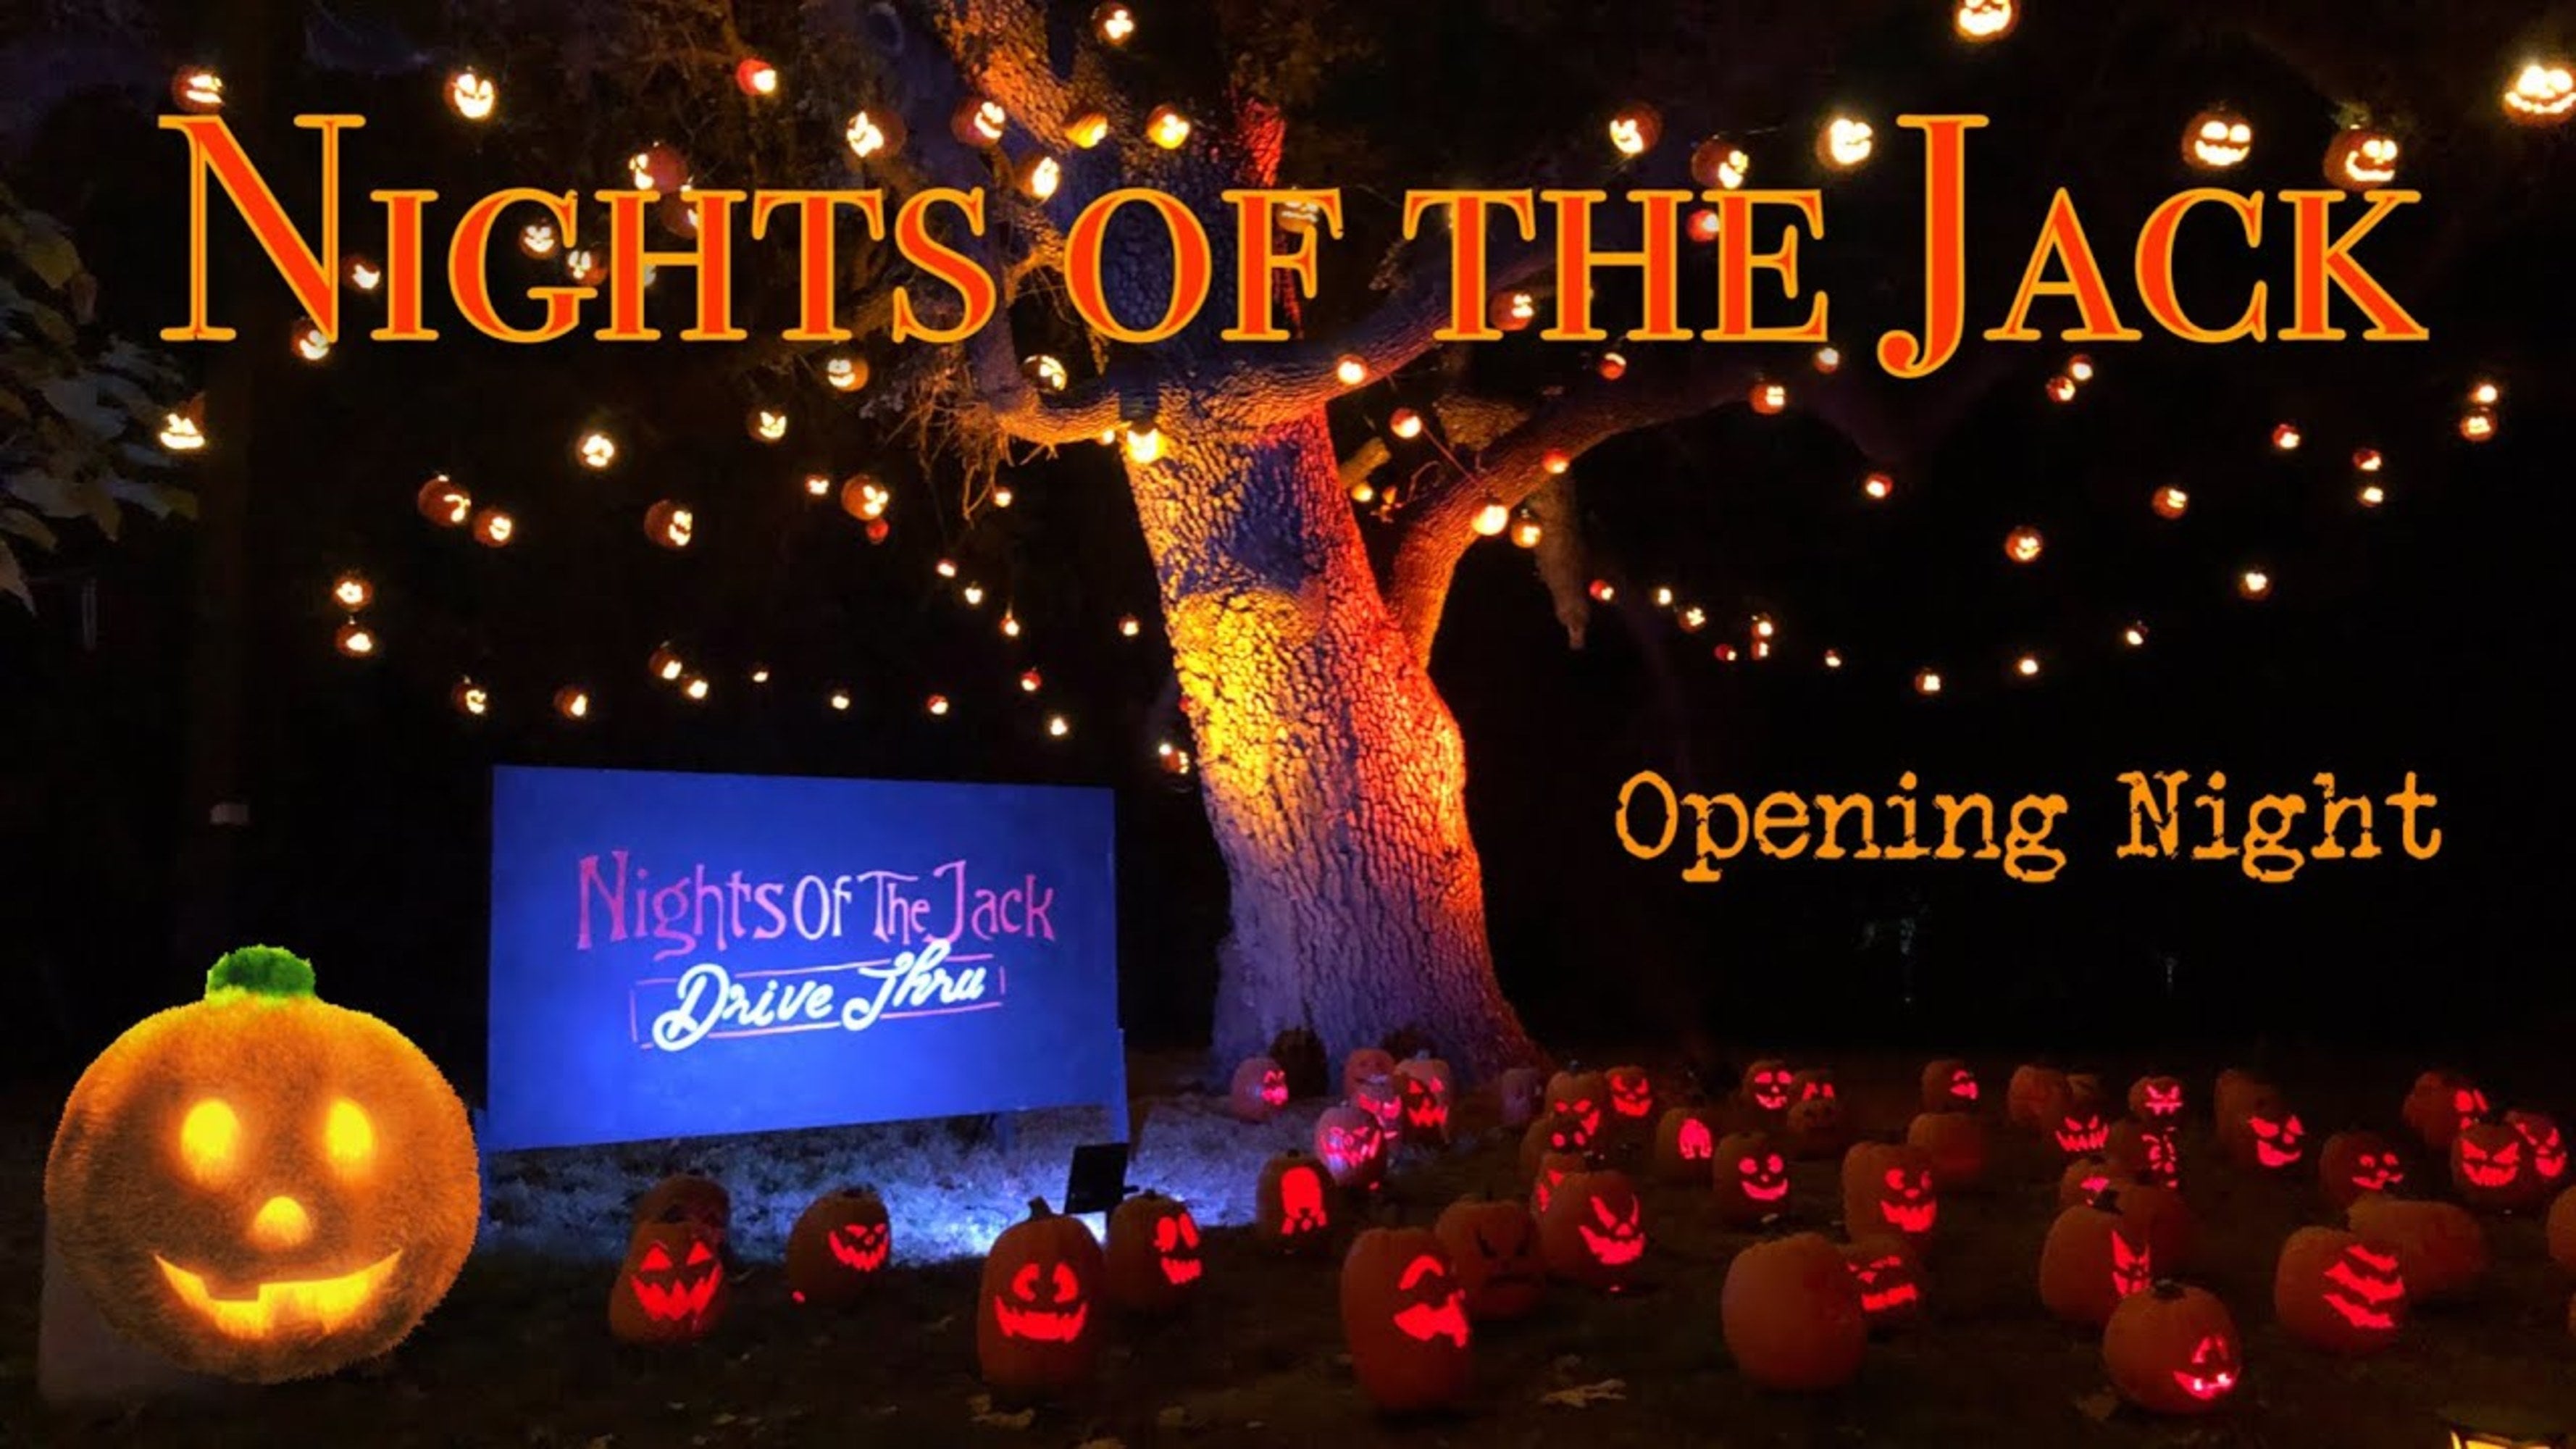 Nights of the Jack Discover Los Angeles